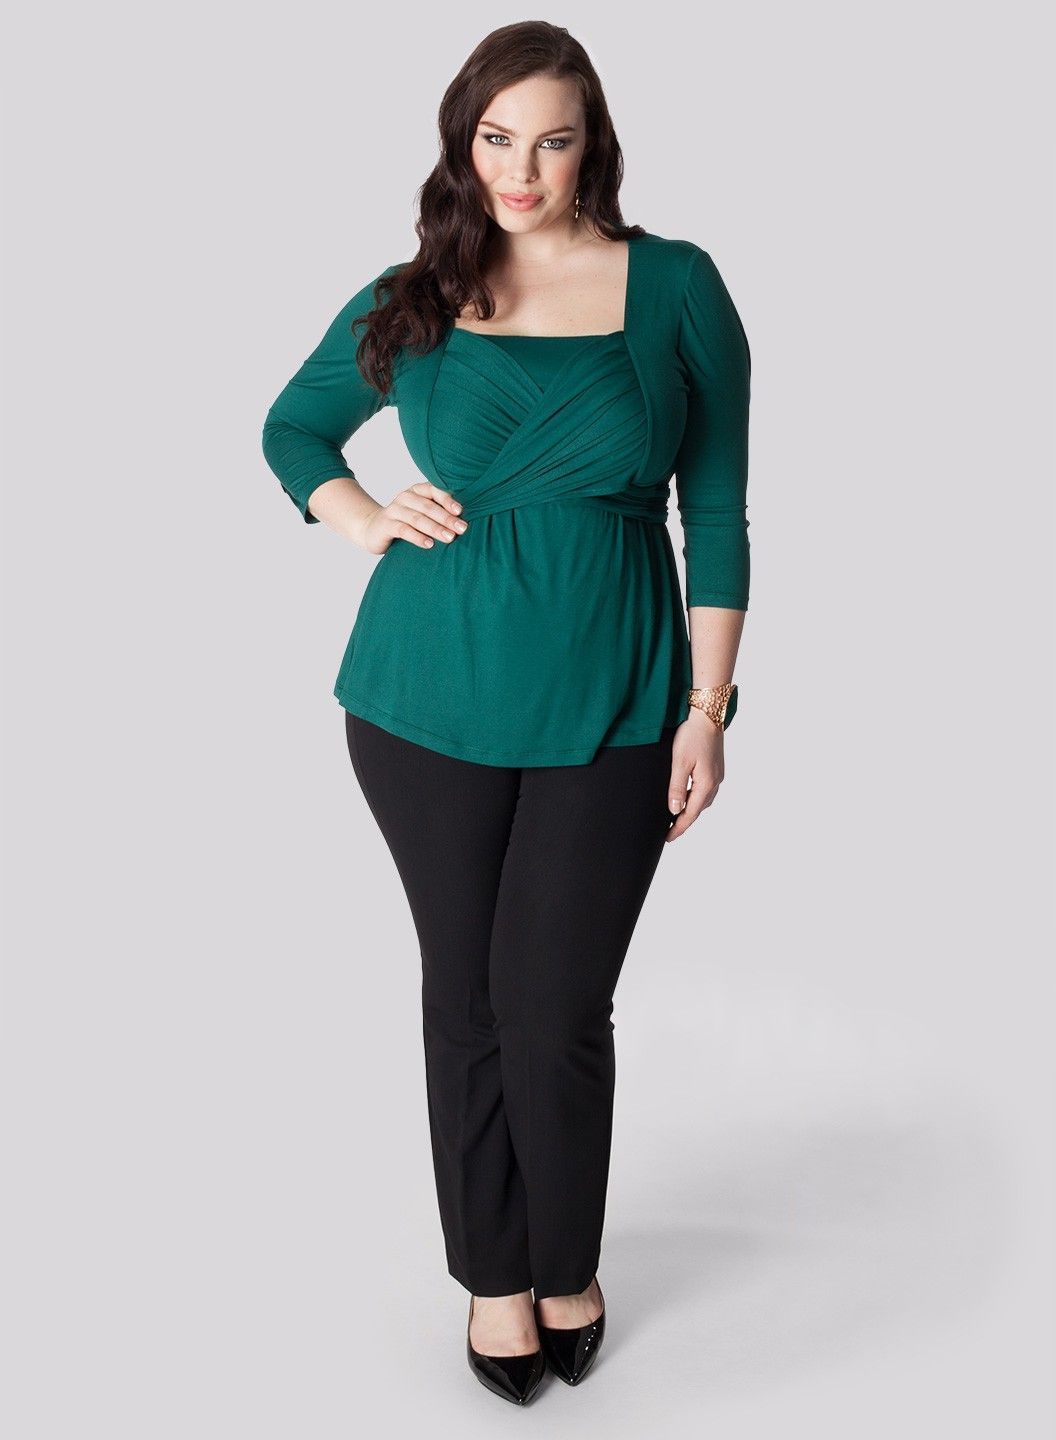 What To Wear If You Are Short And Plus Size